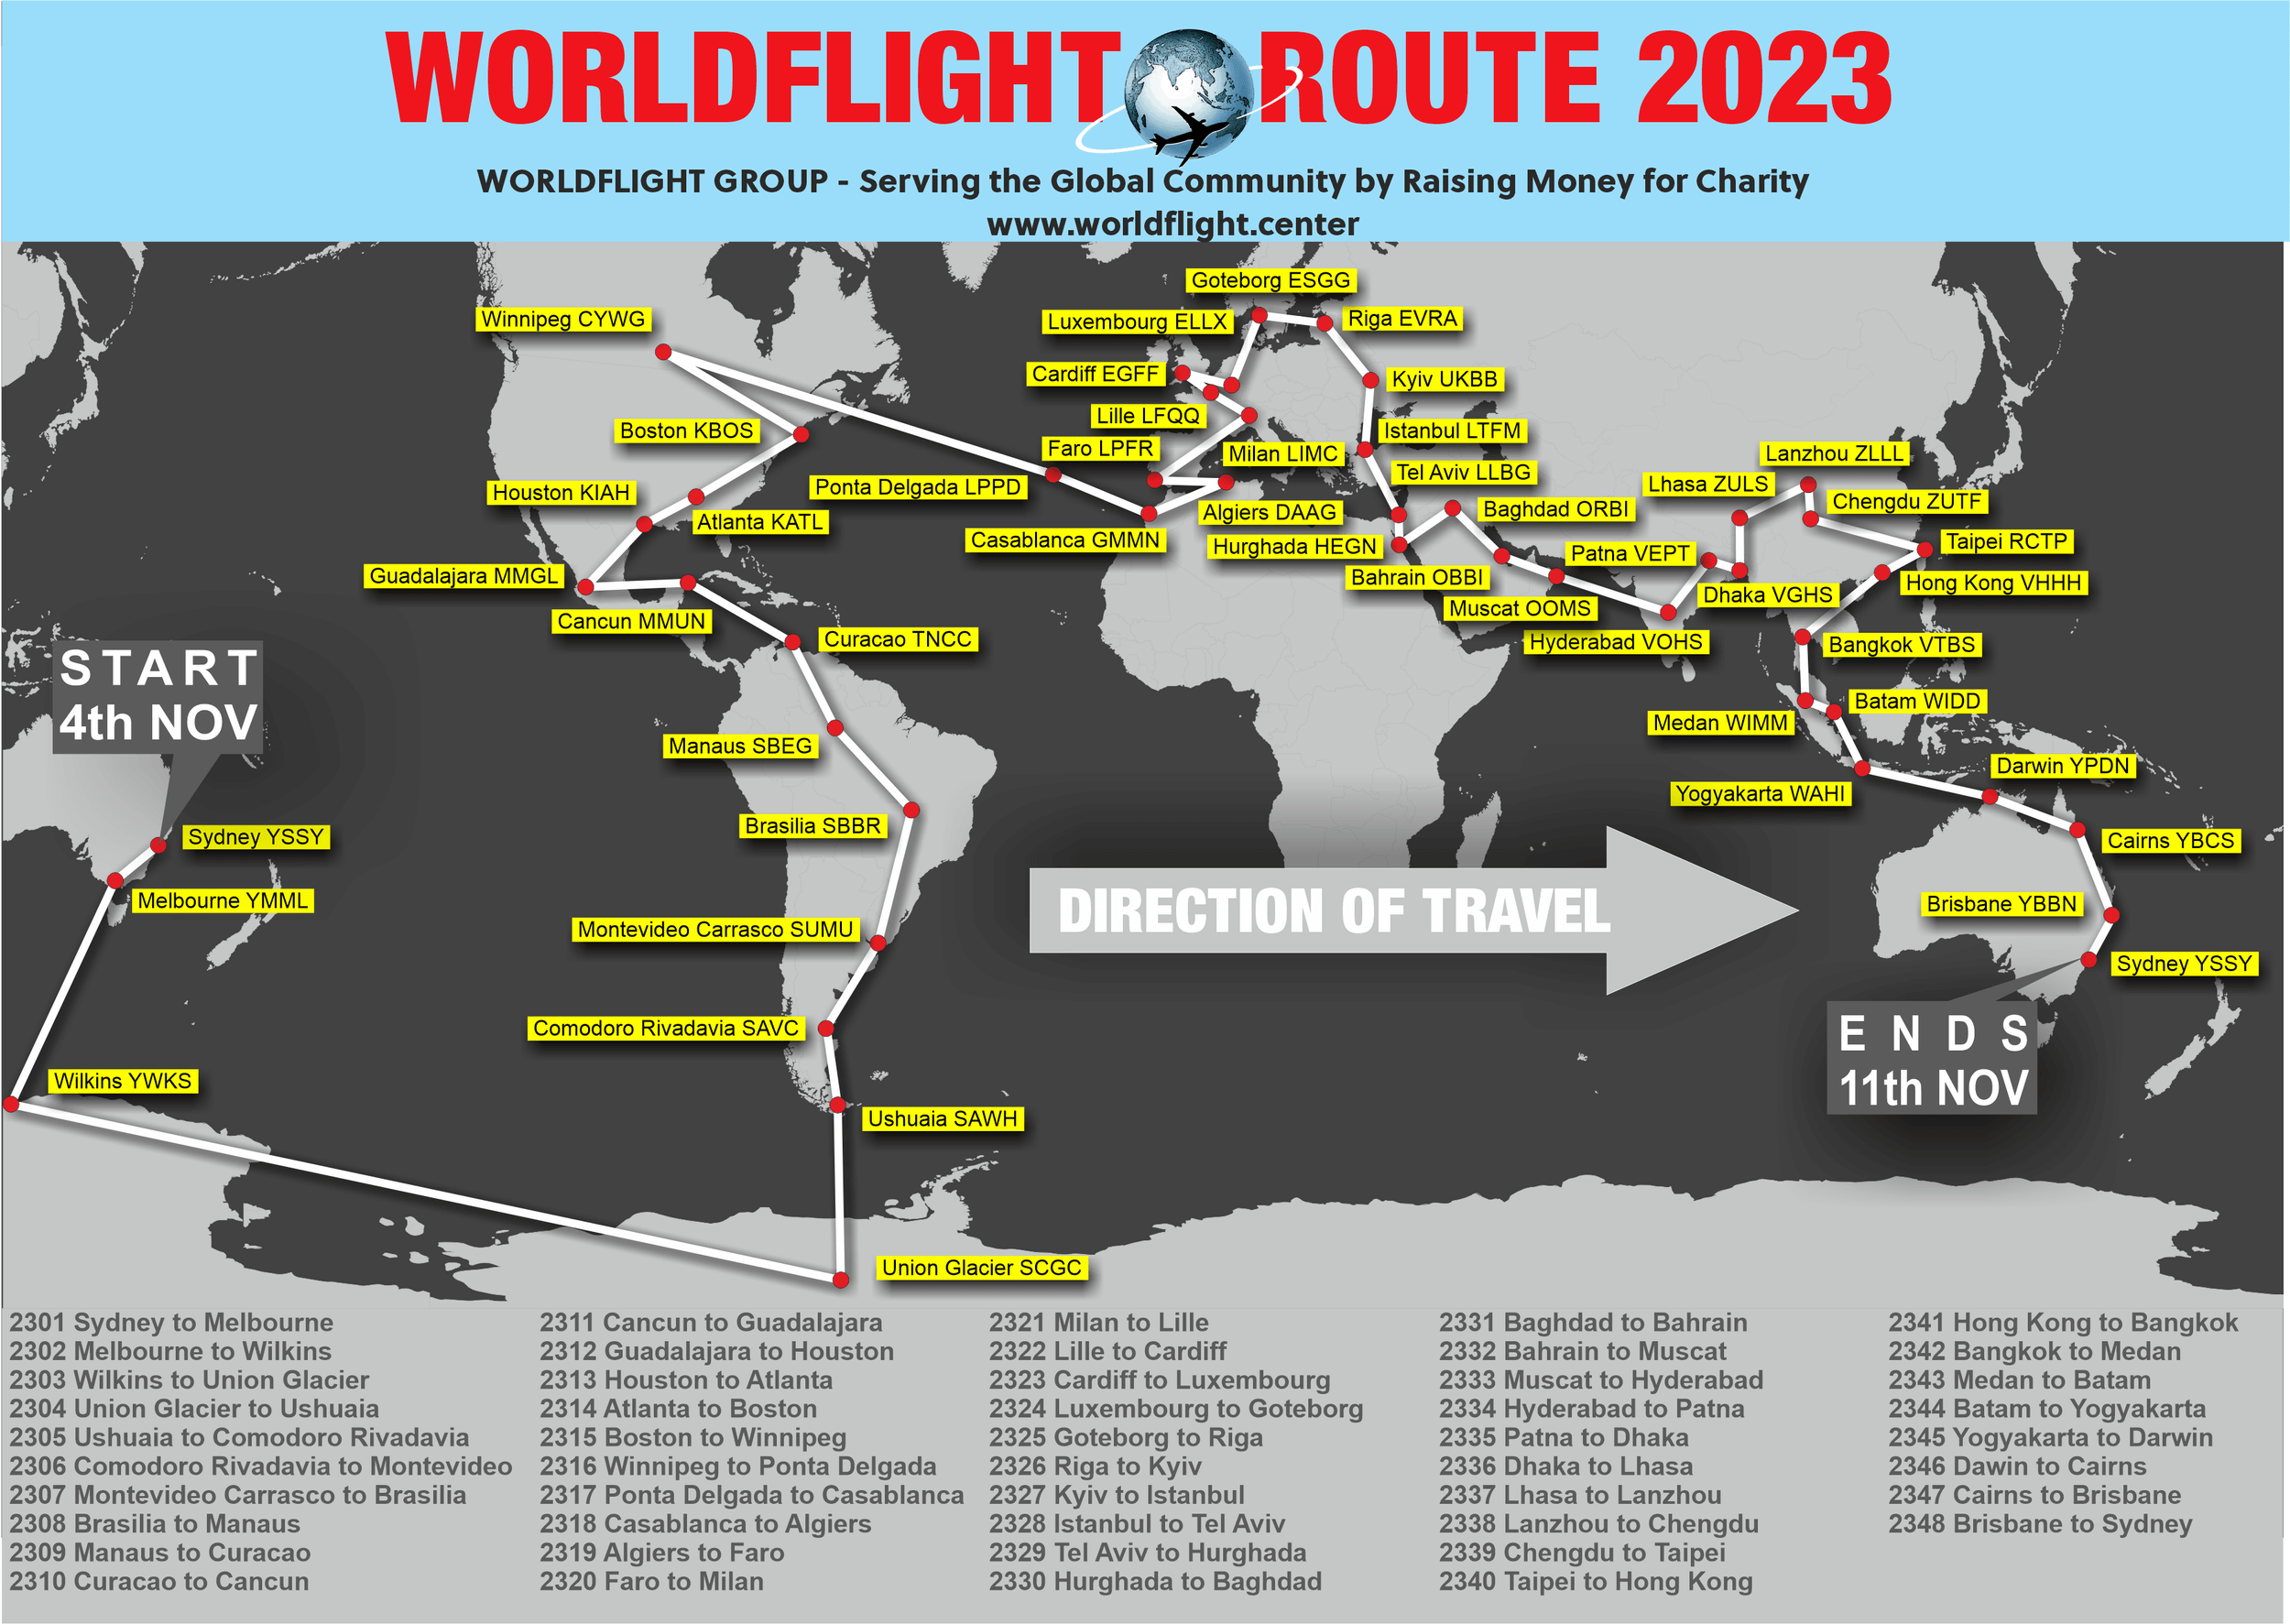 The WorldFlight 2023 Route map showing every airport that the tour will pass through from November 4th to November 11th.